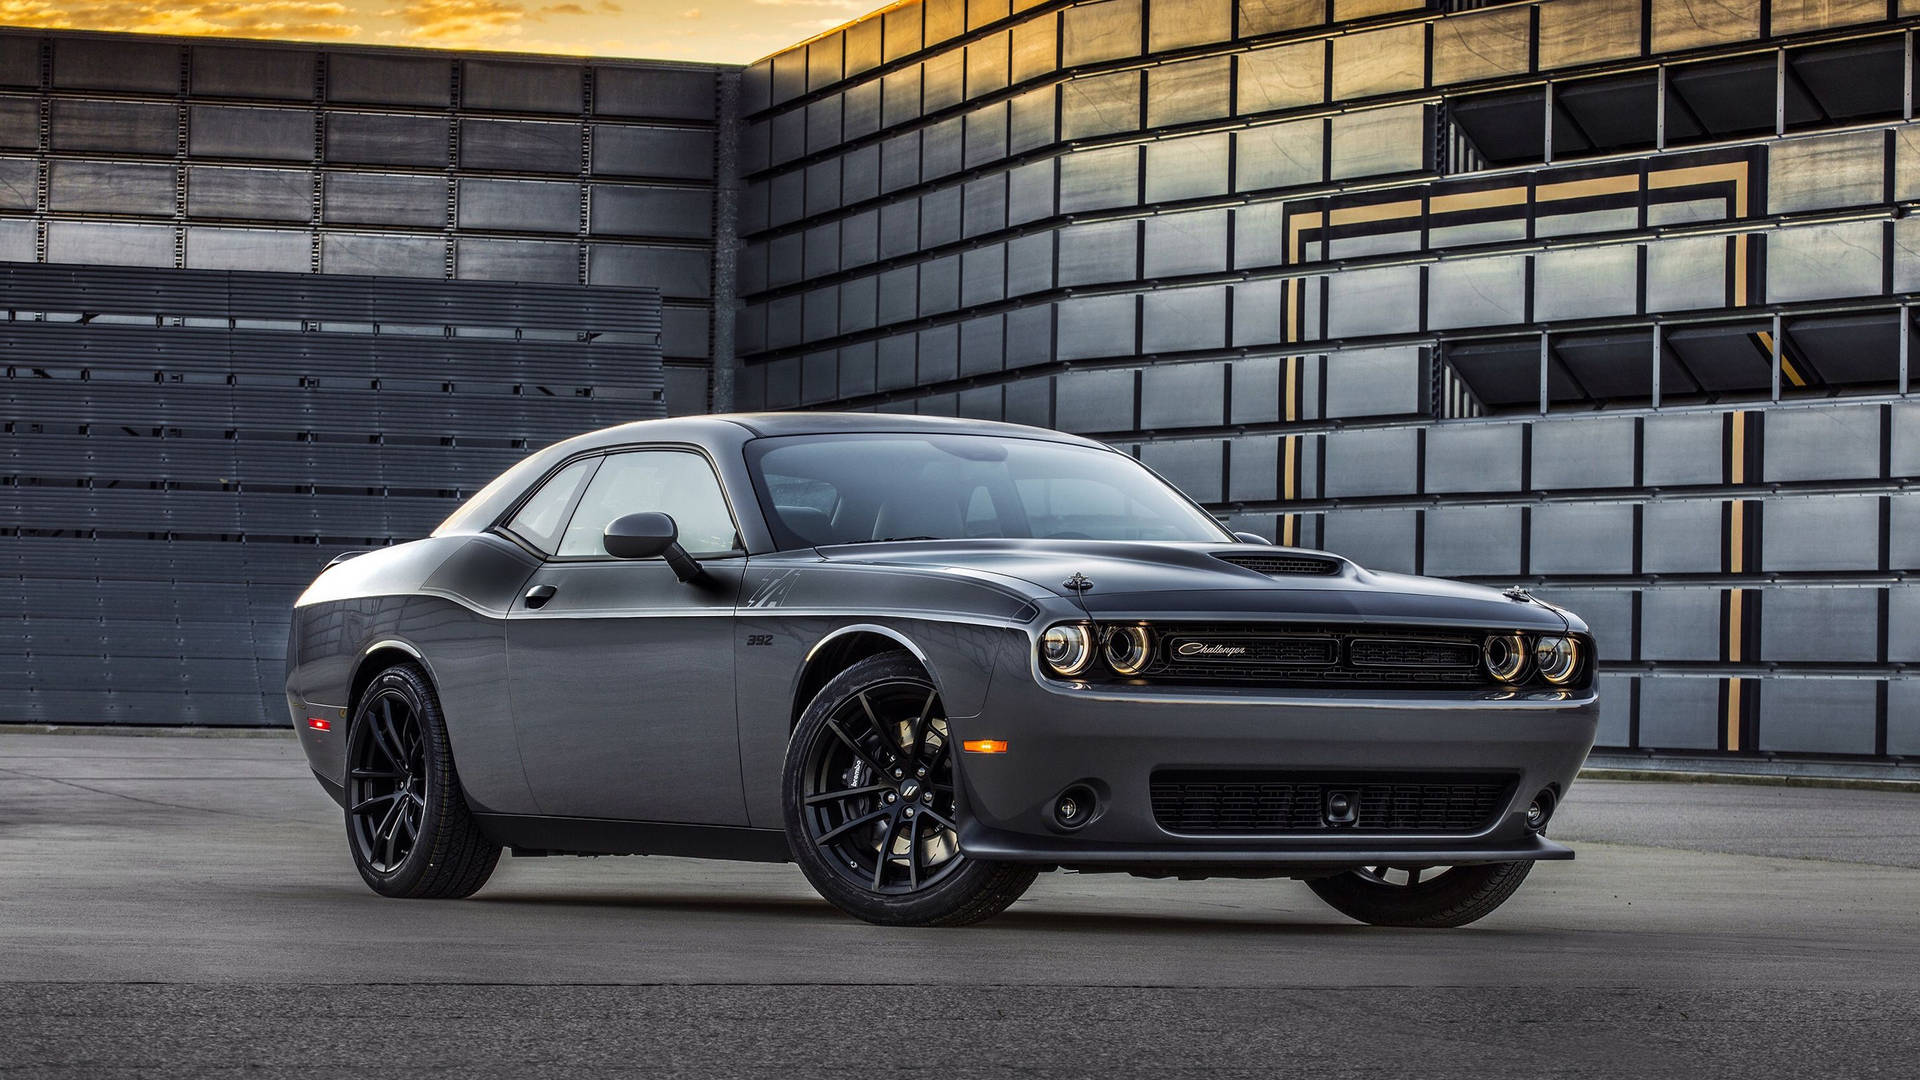 Dodge Challenger With Wide Body Design Wallpaper